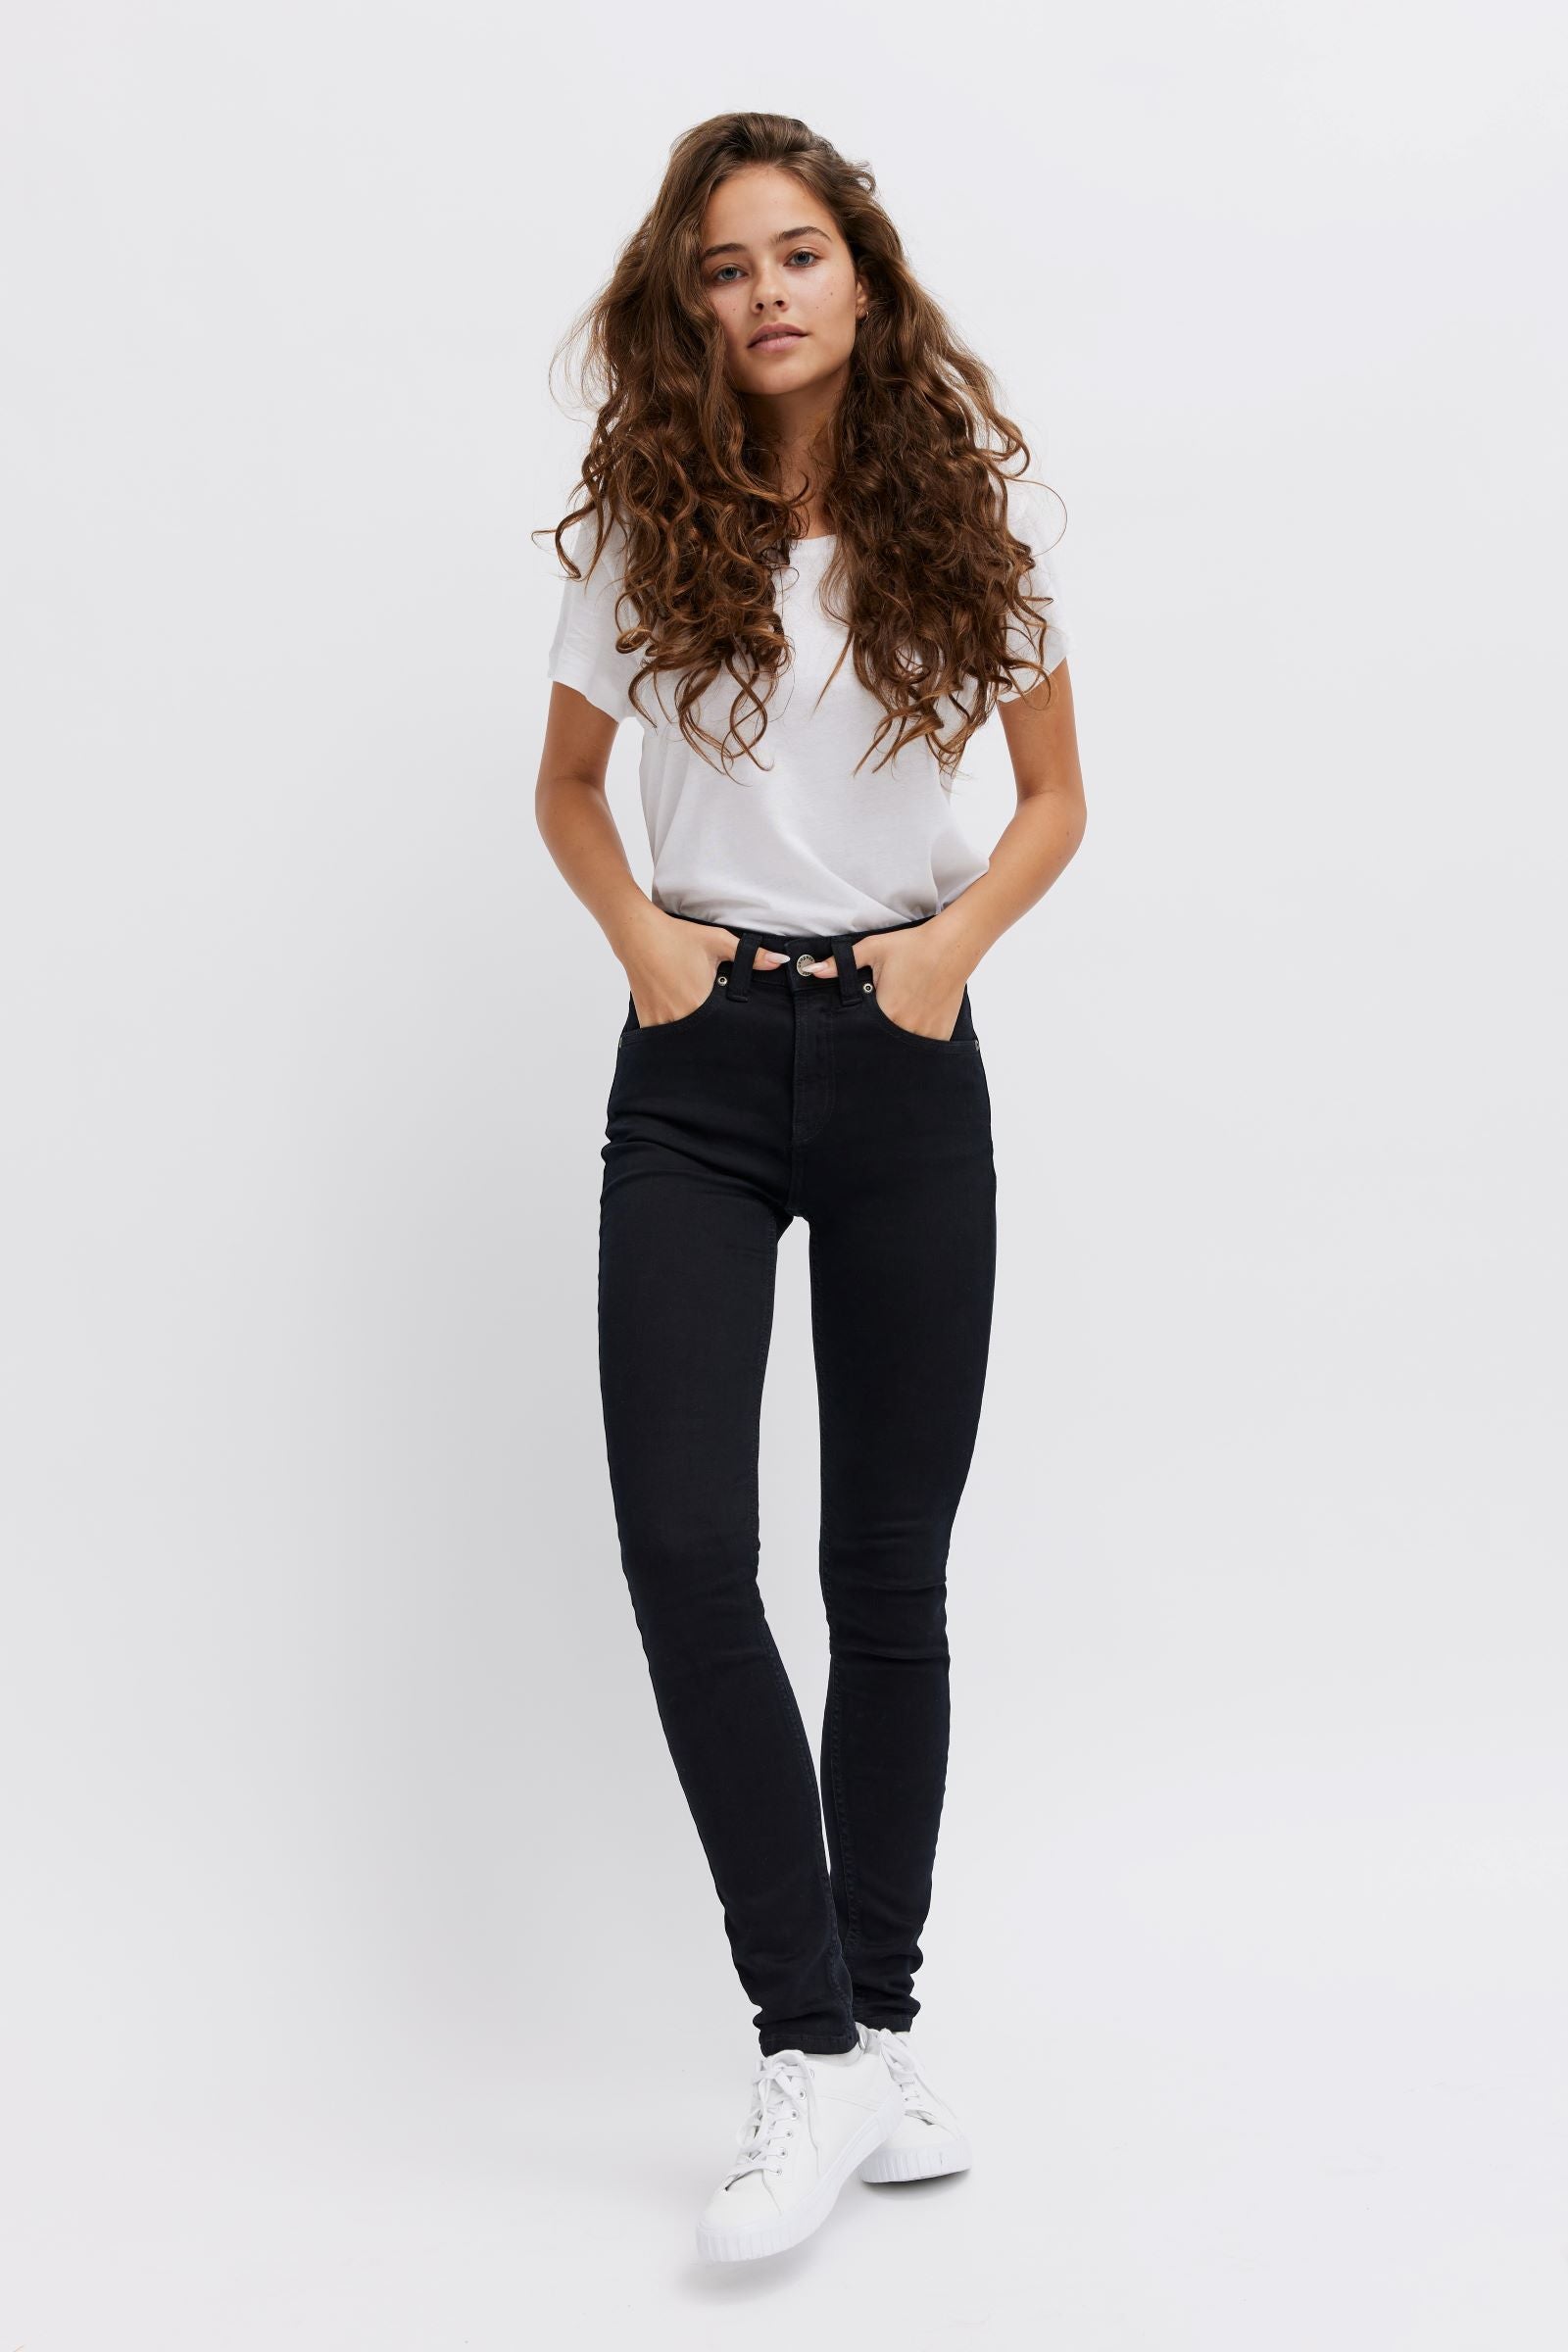 Organic, black and stylish jeans - Women's perfect jeans